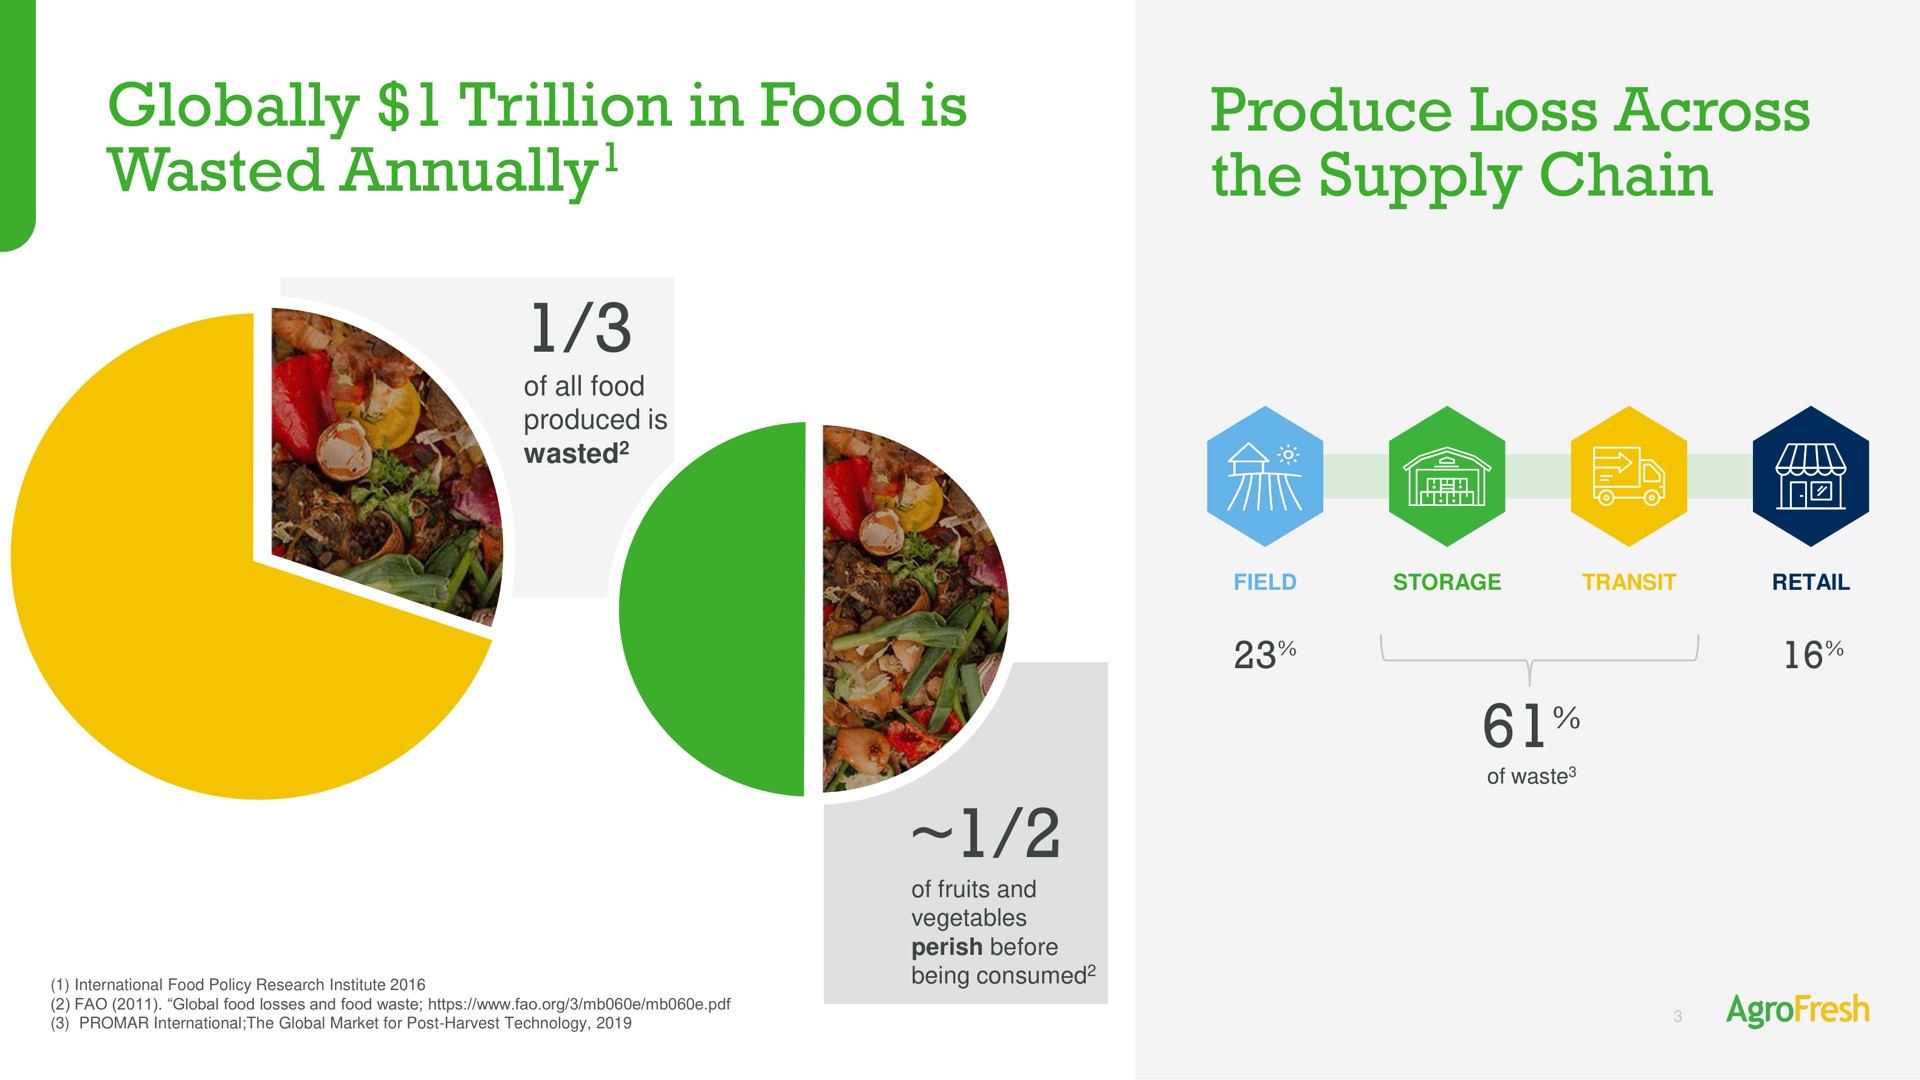 globally trillion in food is wasted annually produce loss across the supply chain annually | AgroFresh